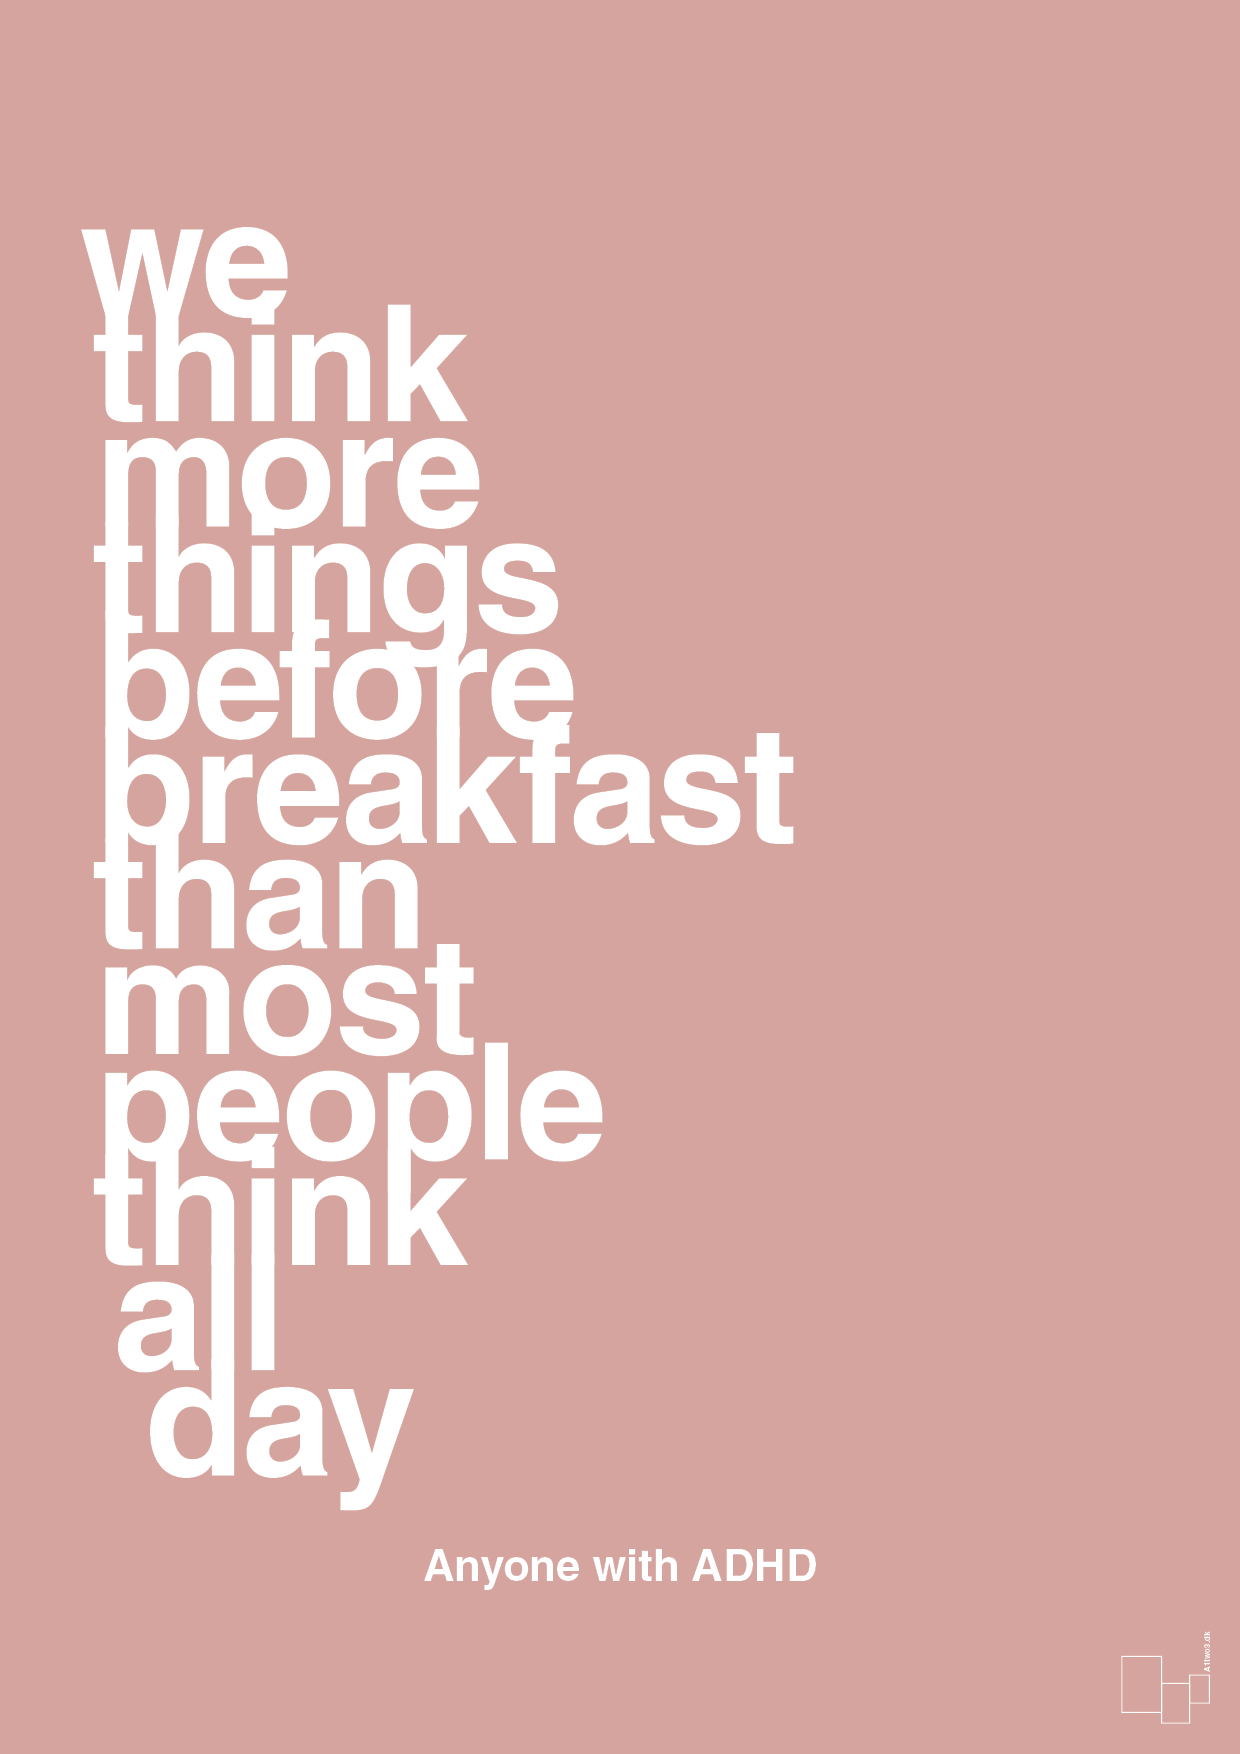 we think more things before breakfast than most people think all day - Plakat med Samfund i Bubble Shell